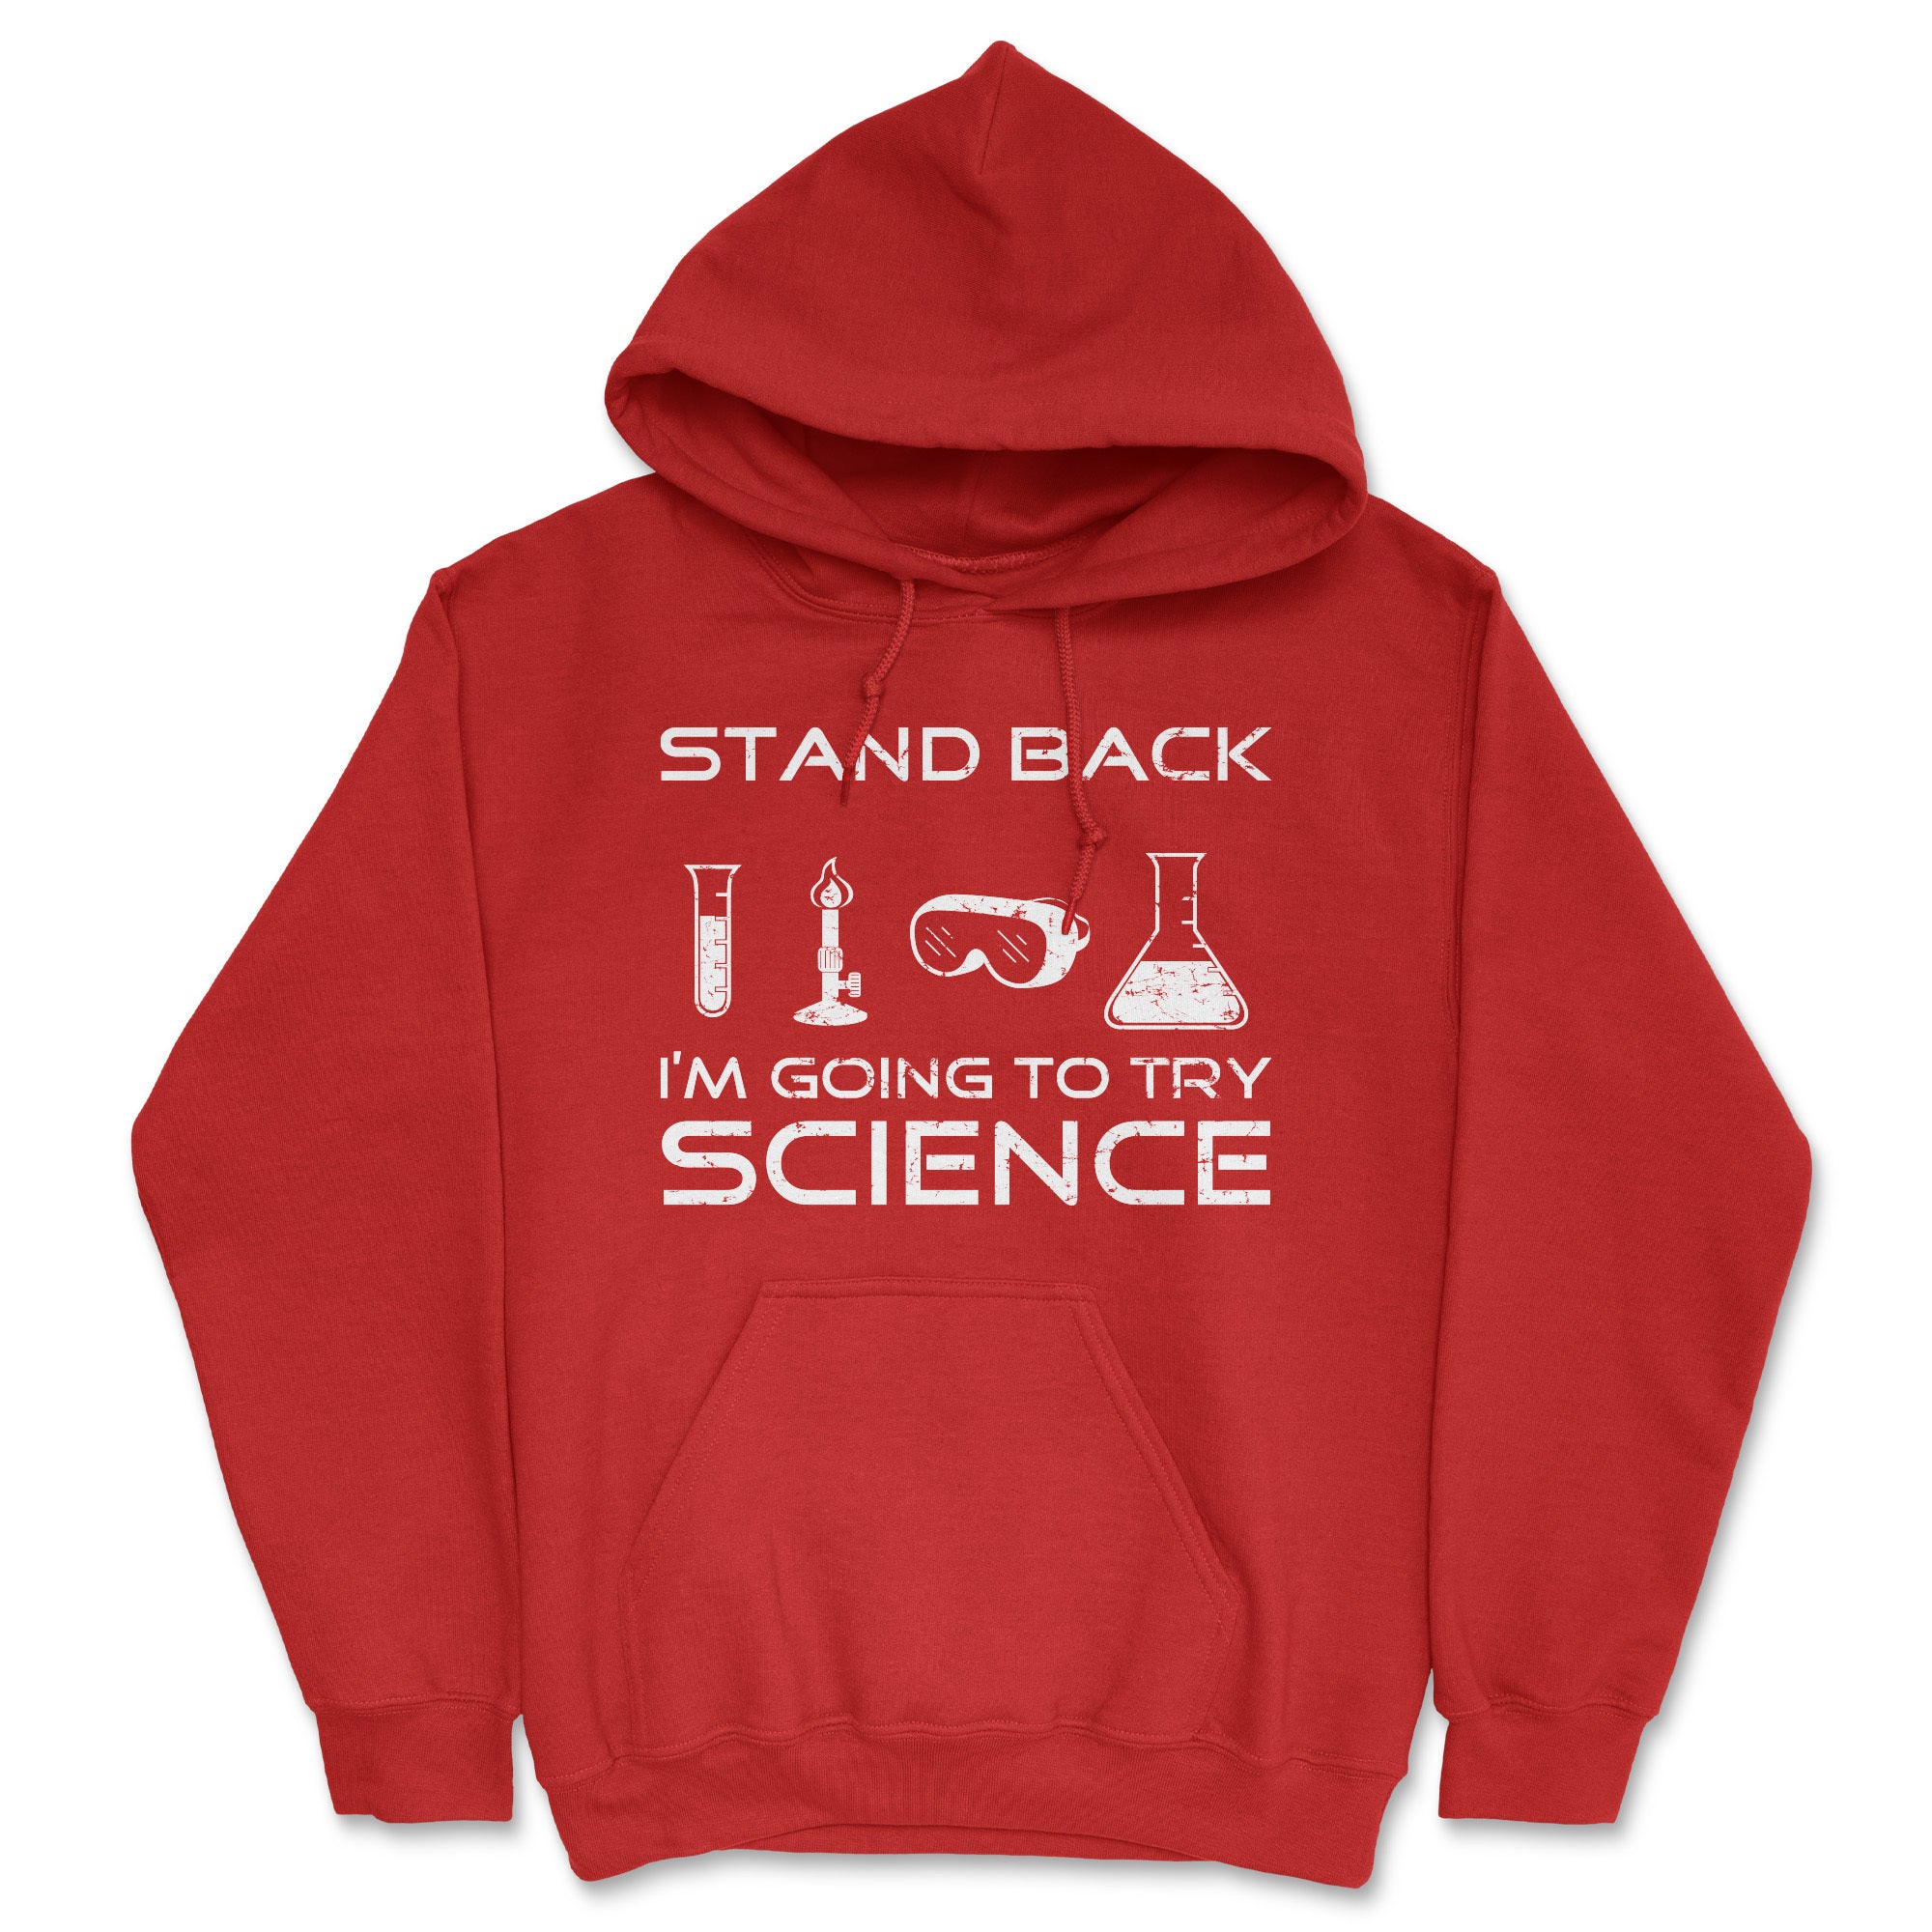 Funny Red Stand Back I'm Going To Try Science Hoodie Nerdy Nerdy Science Tee